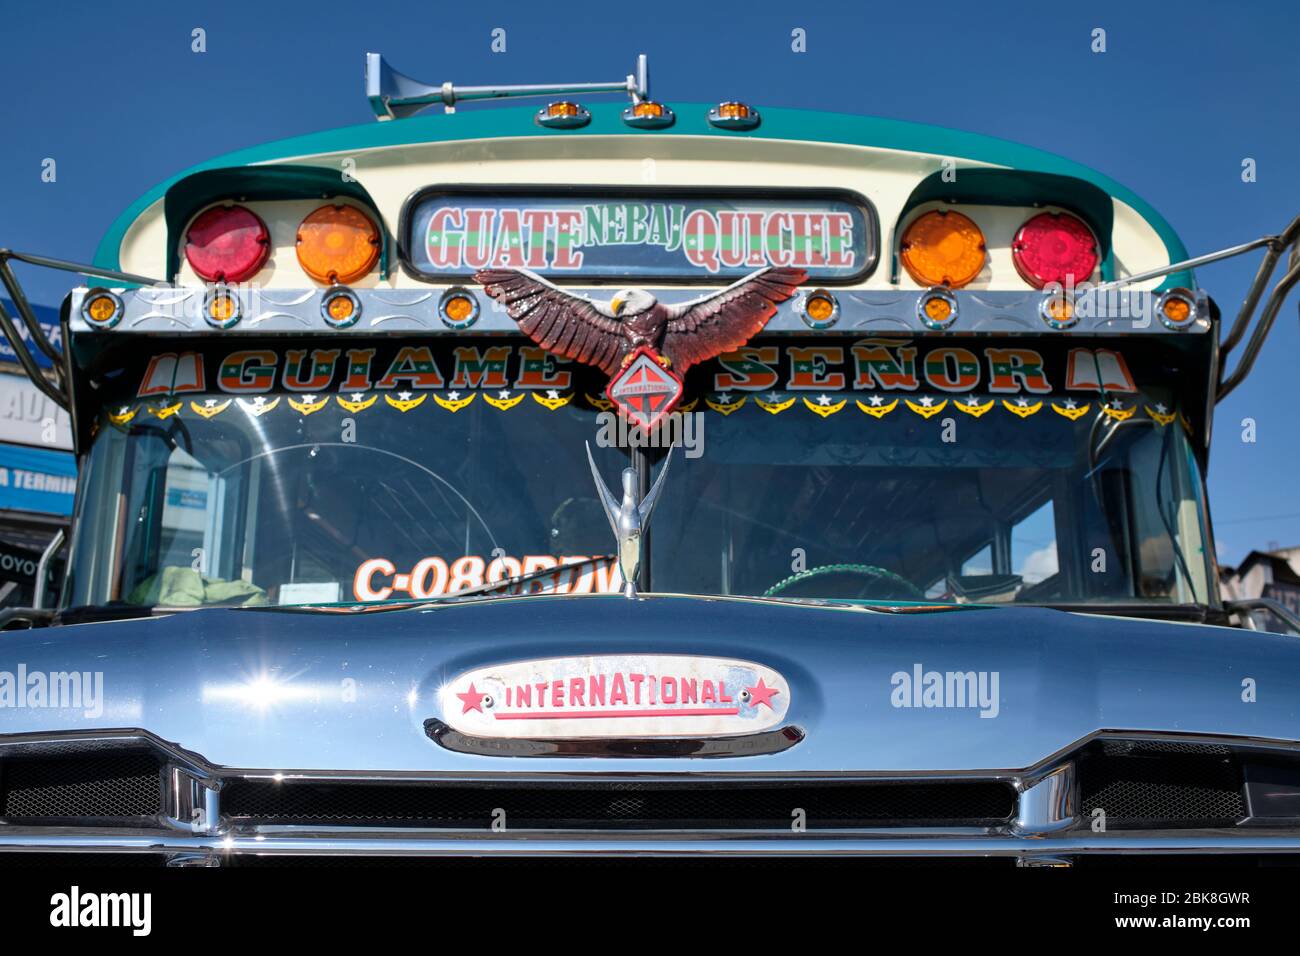 Old, well-kept bus, painted in colors and decorated, parked at the Chichicastenango station. Stock Photo